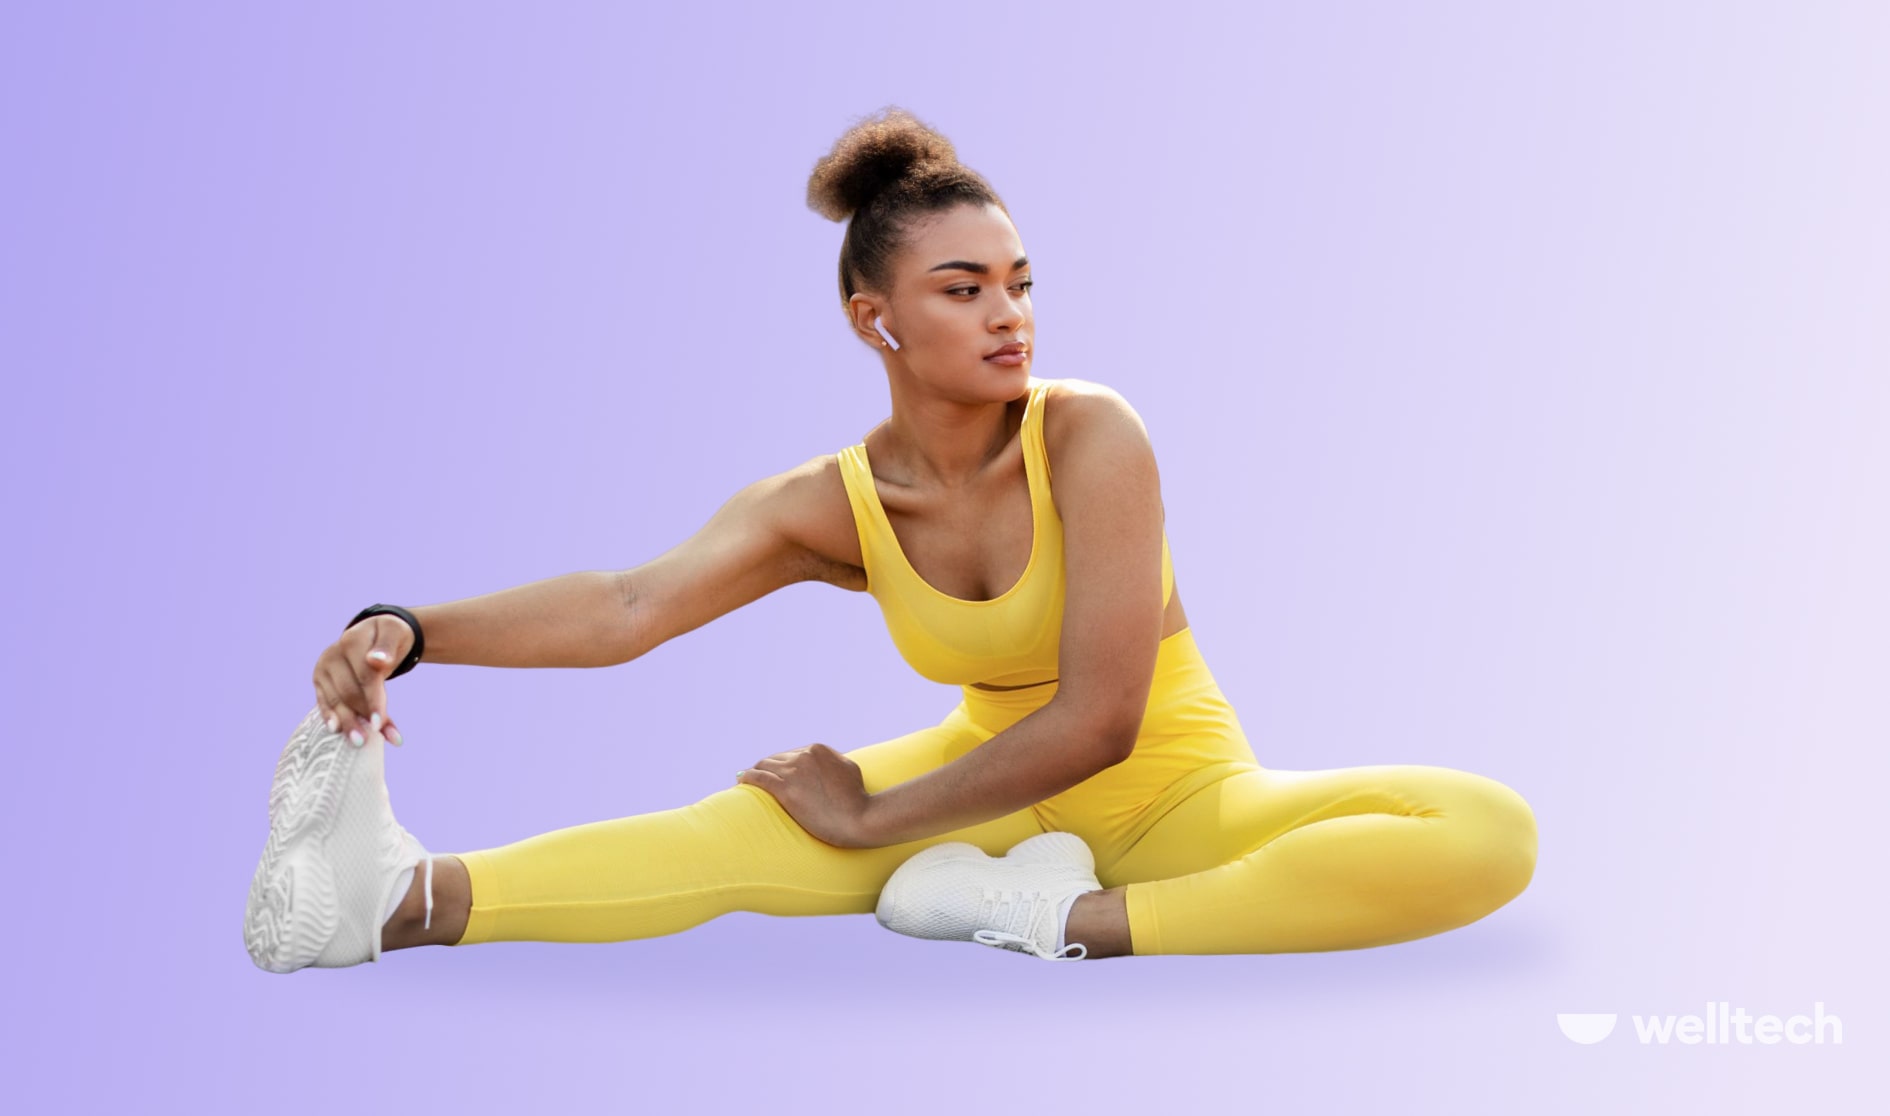 a woman in yellow sportswear is stretching as a part of her cool down yoga routine after a workout